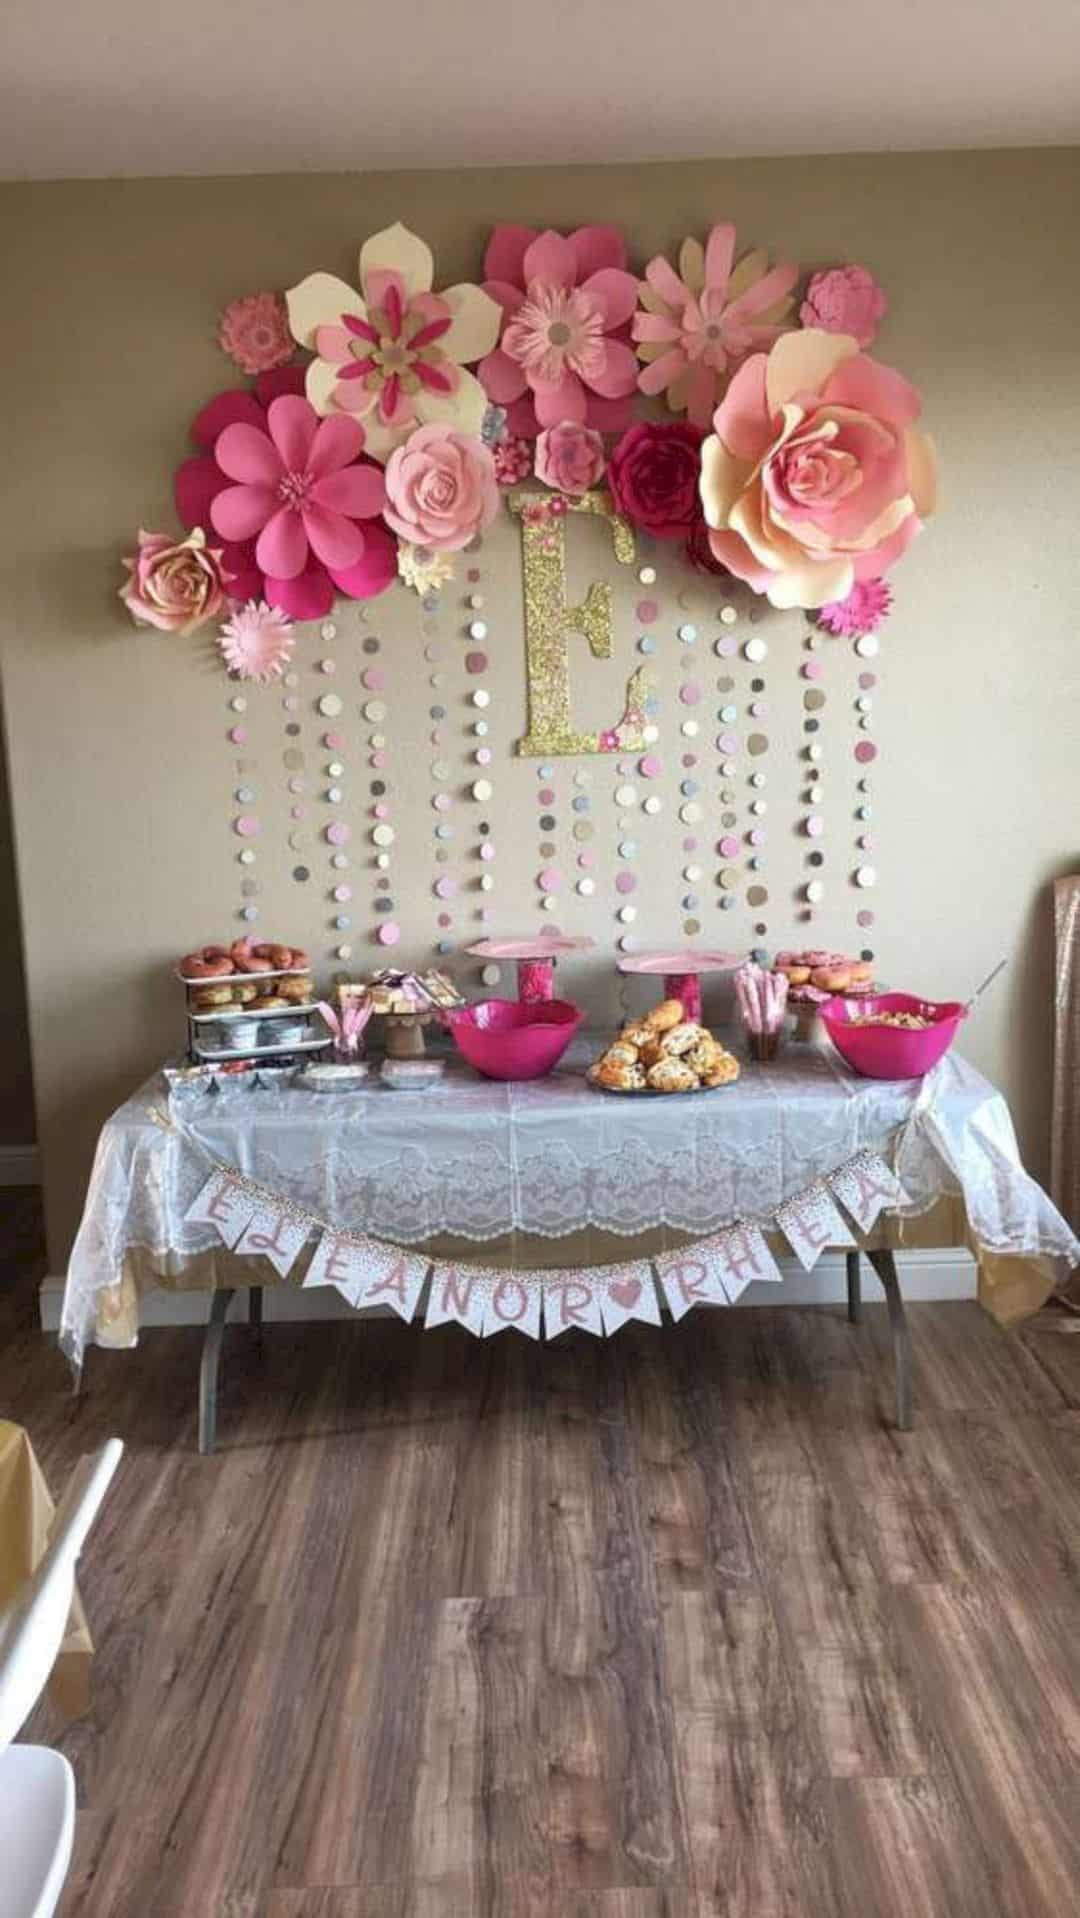 Girl Baby Shower Decorations Ideas
 16 Cute Baby Shower Decorating Ideas